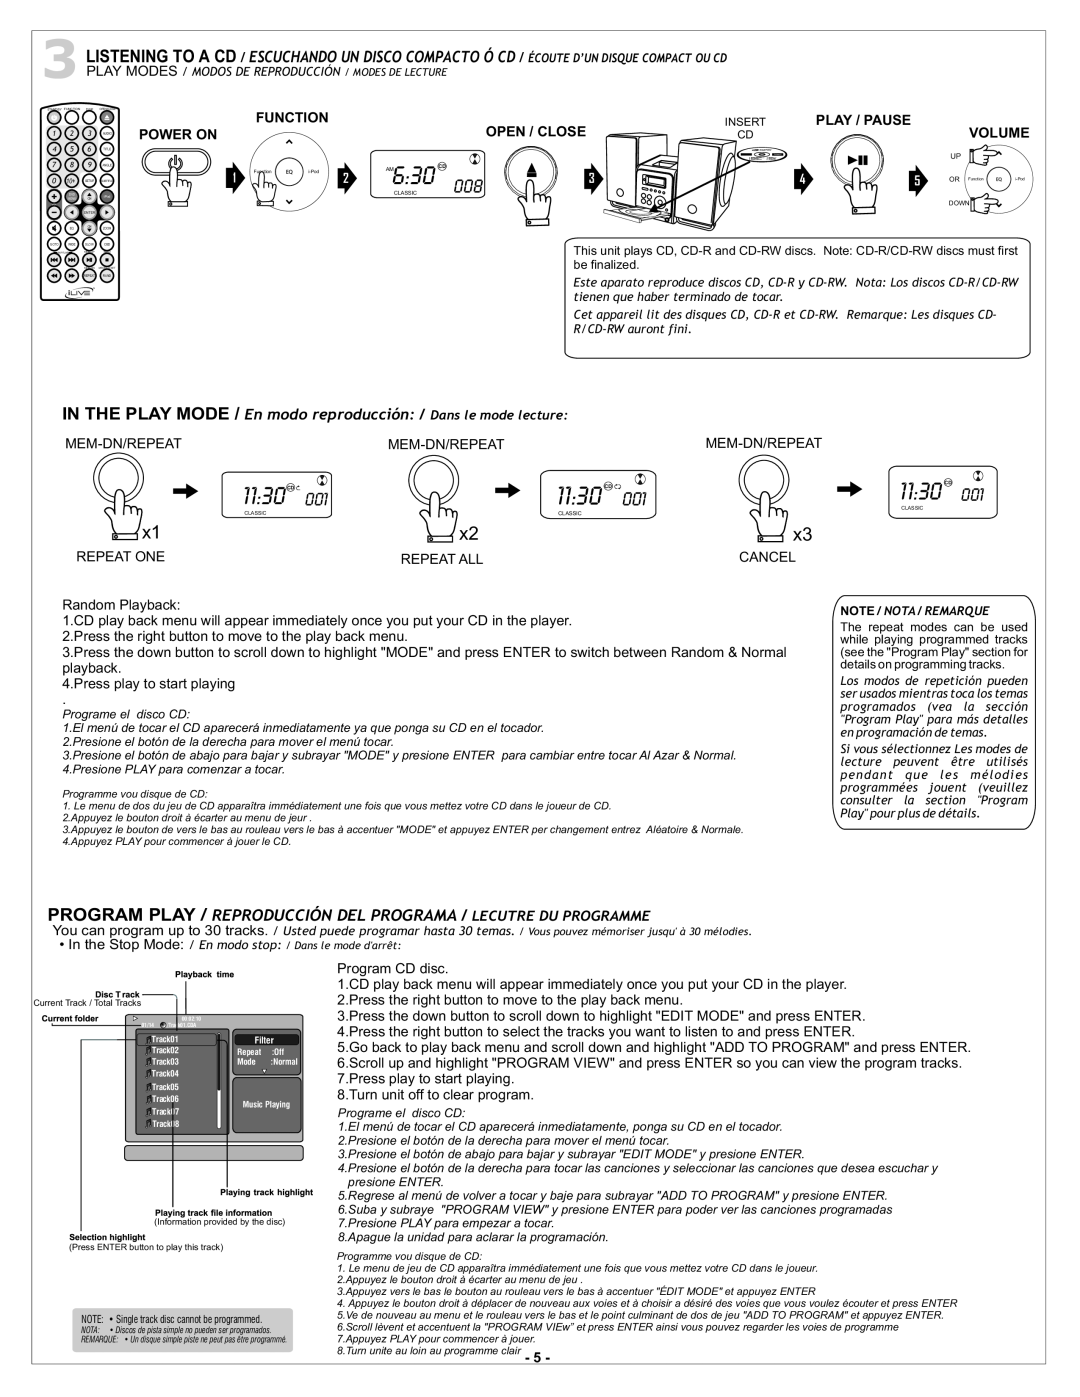 iLive iHMD8816DT-E1 instruction manual Function, Power On, Open / Close, Play / Pause, Volume, Note / Nota / Remarque 